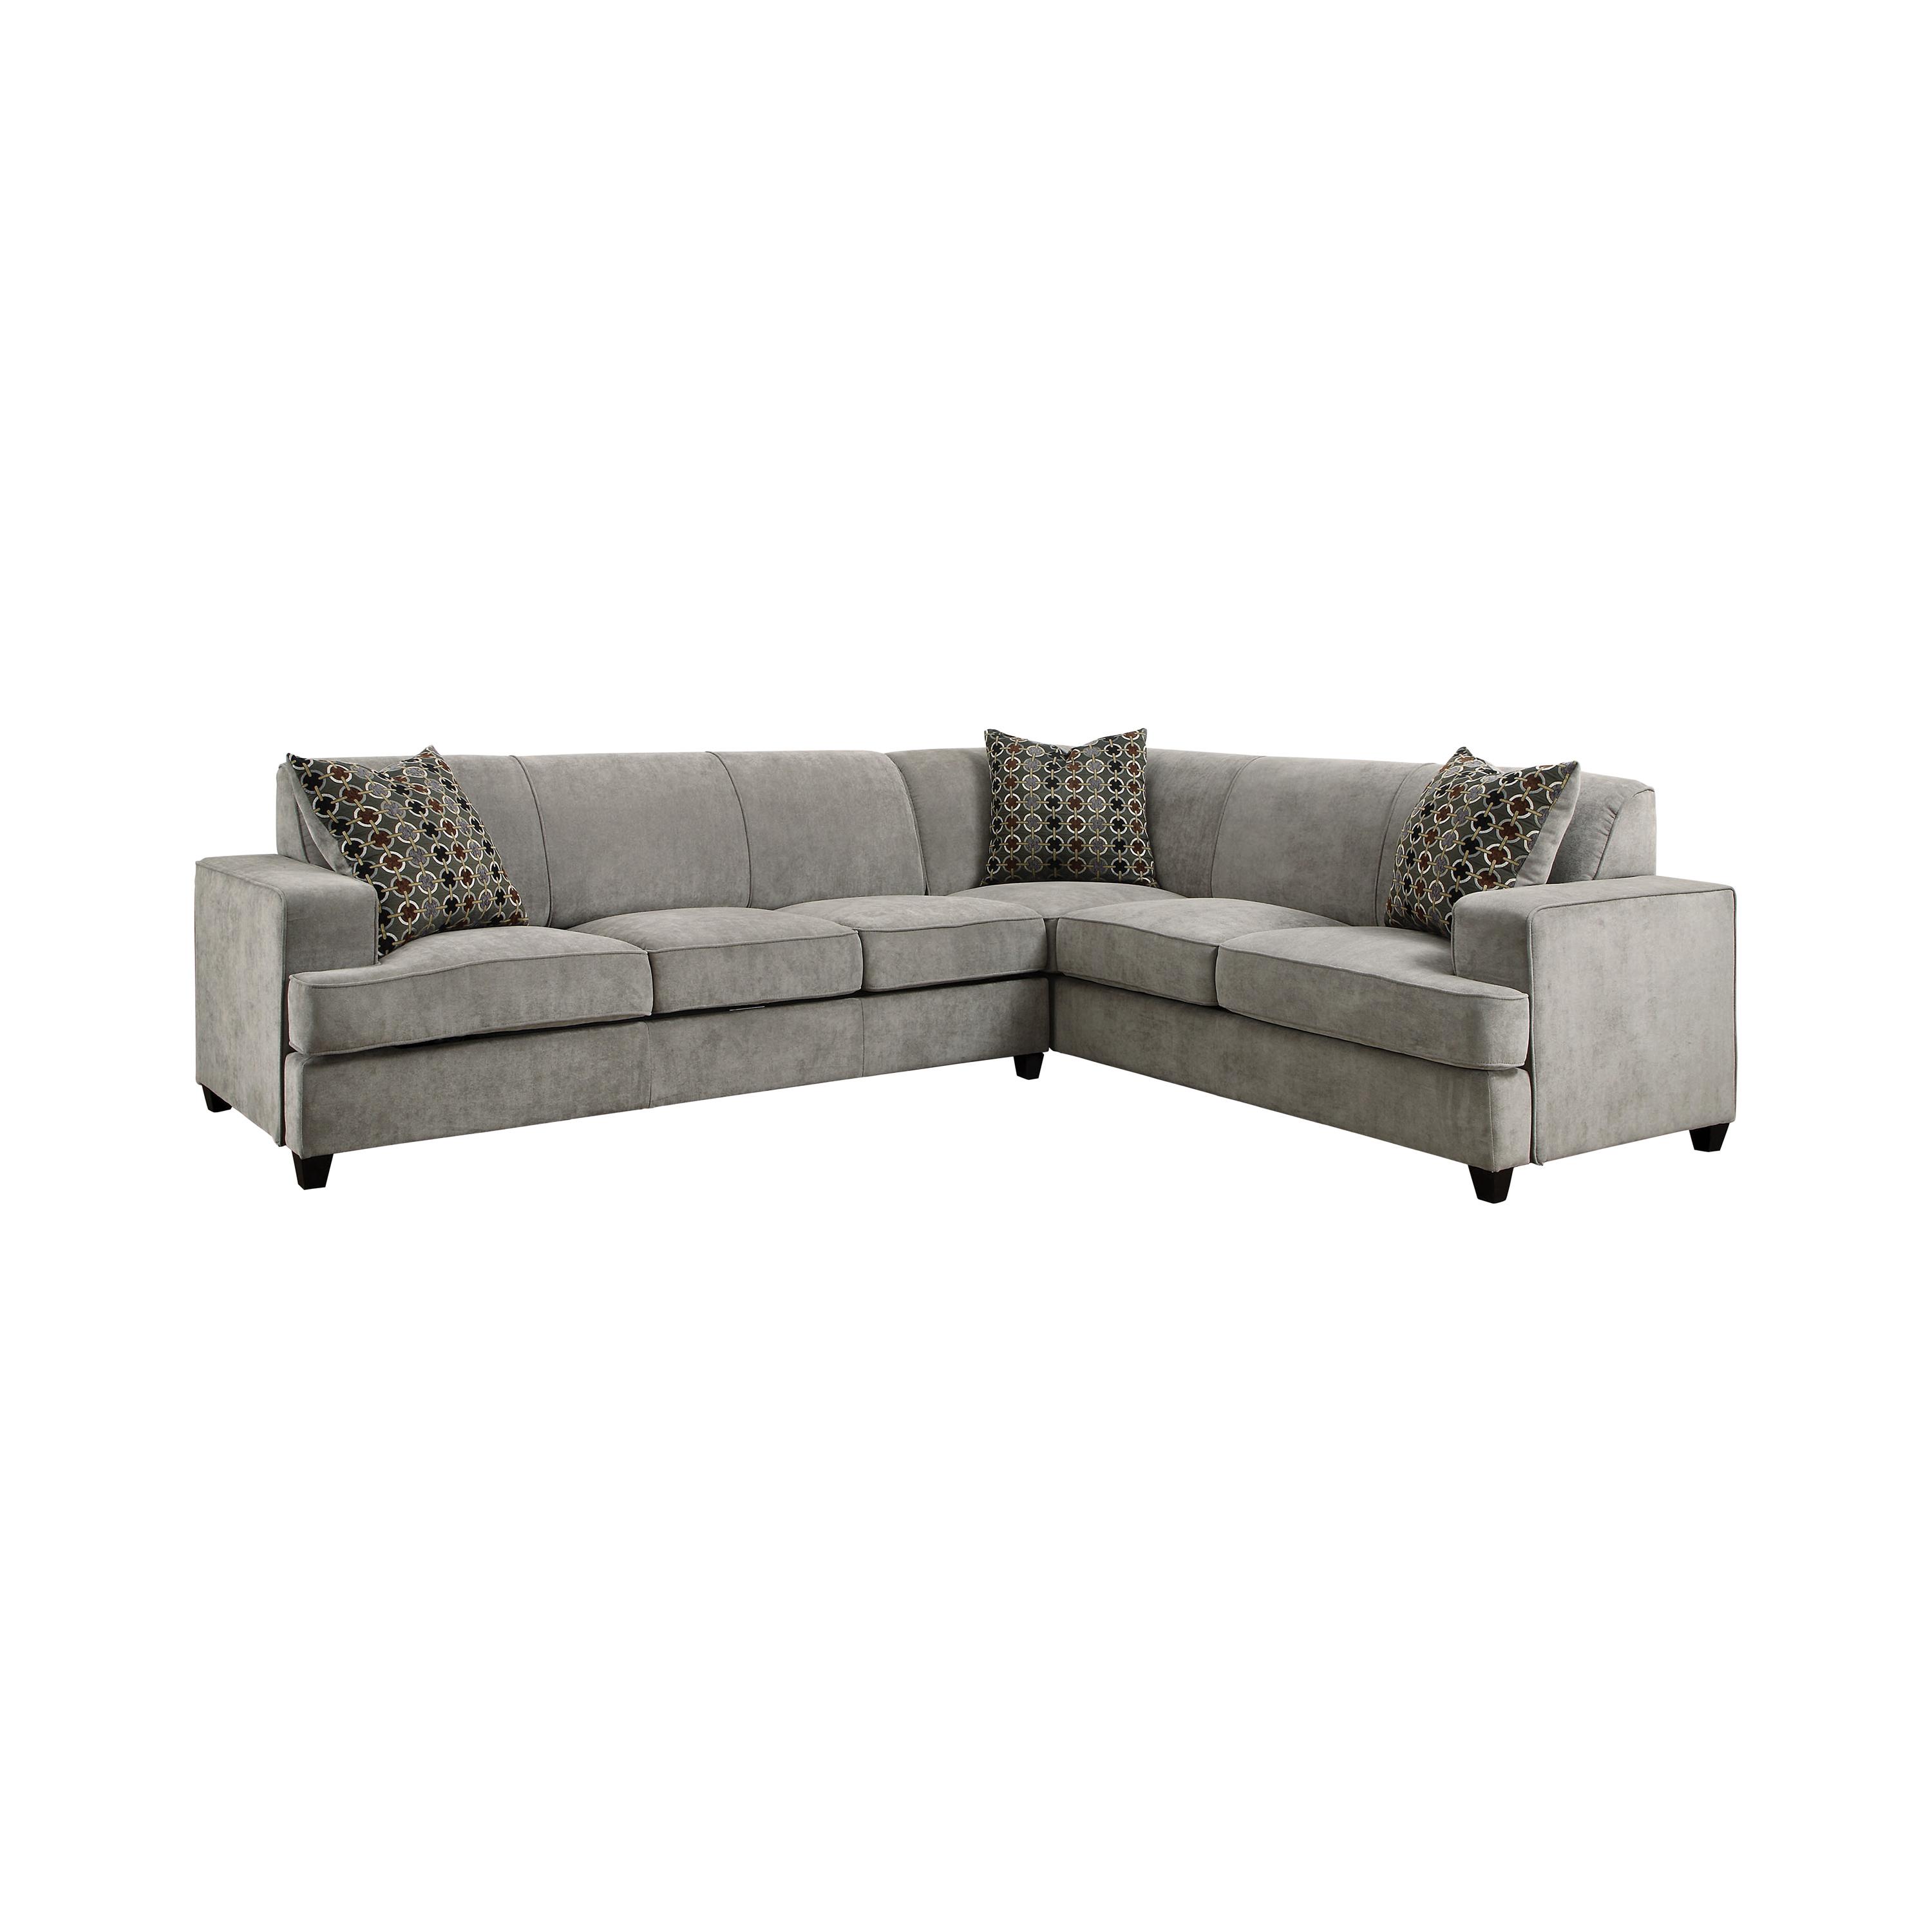 Contemporary Sleeper Sectional 500727 Tess 500727 in Gray 